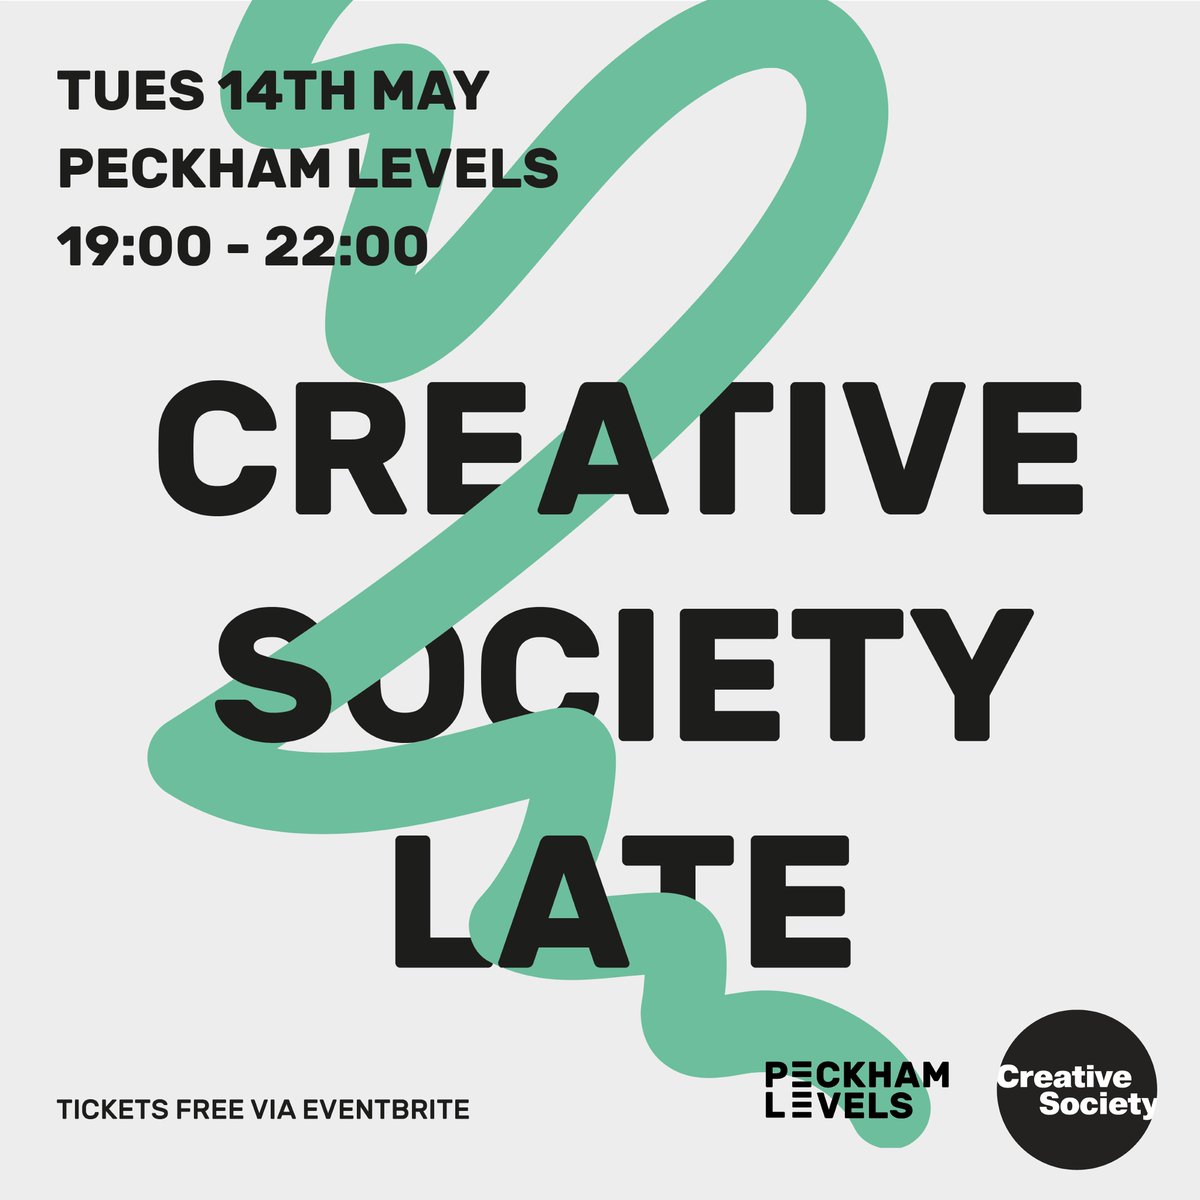 Looking forward to working on this tomorrow at @peckhamlevels. We've got a top line up, including the brilliant @FredFredas @TripSixVivo @TayoTheCreator_ @gyallikeannie + loads more. All hosted by #SlamThePoet. Last few tickets left eventbrite.co.uk/e/creative-soc…